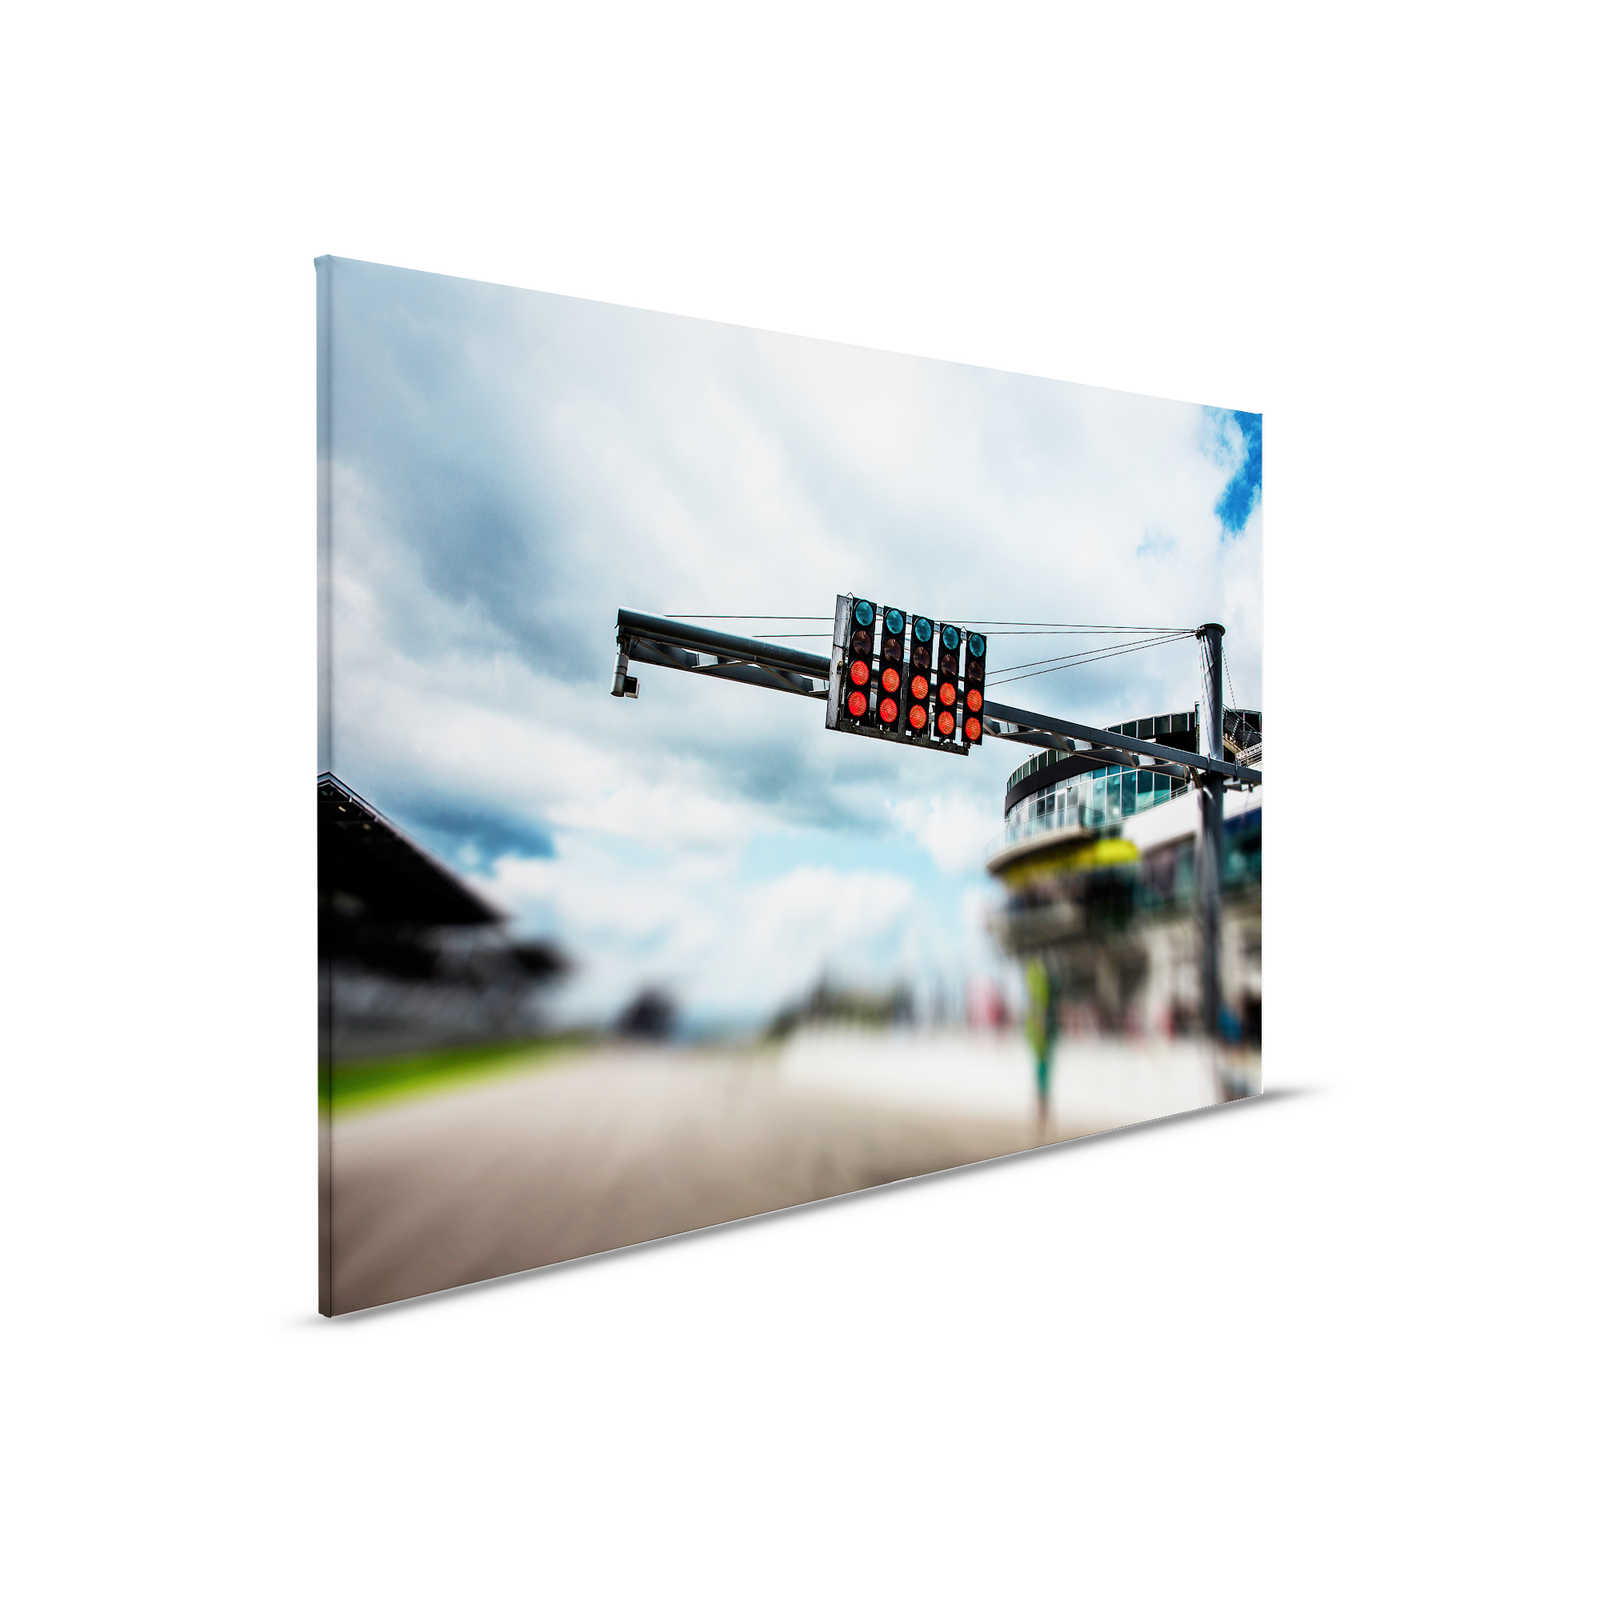         Canvas painting Race track with traffic lights and building - 0,90 m x 0,60 m
    